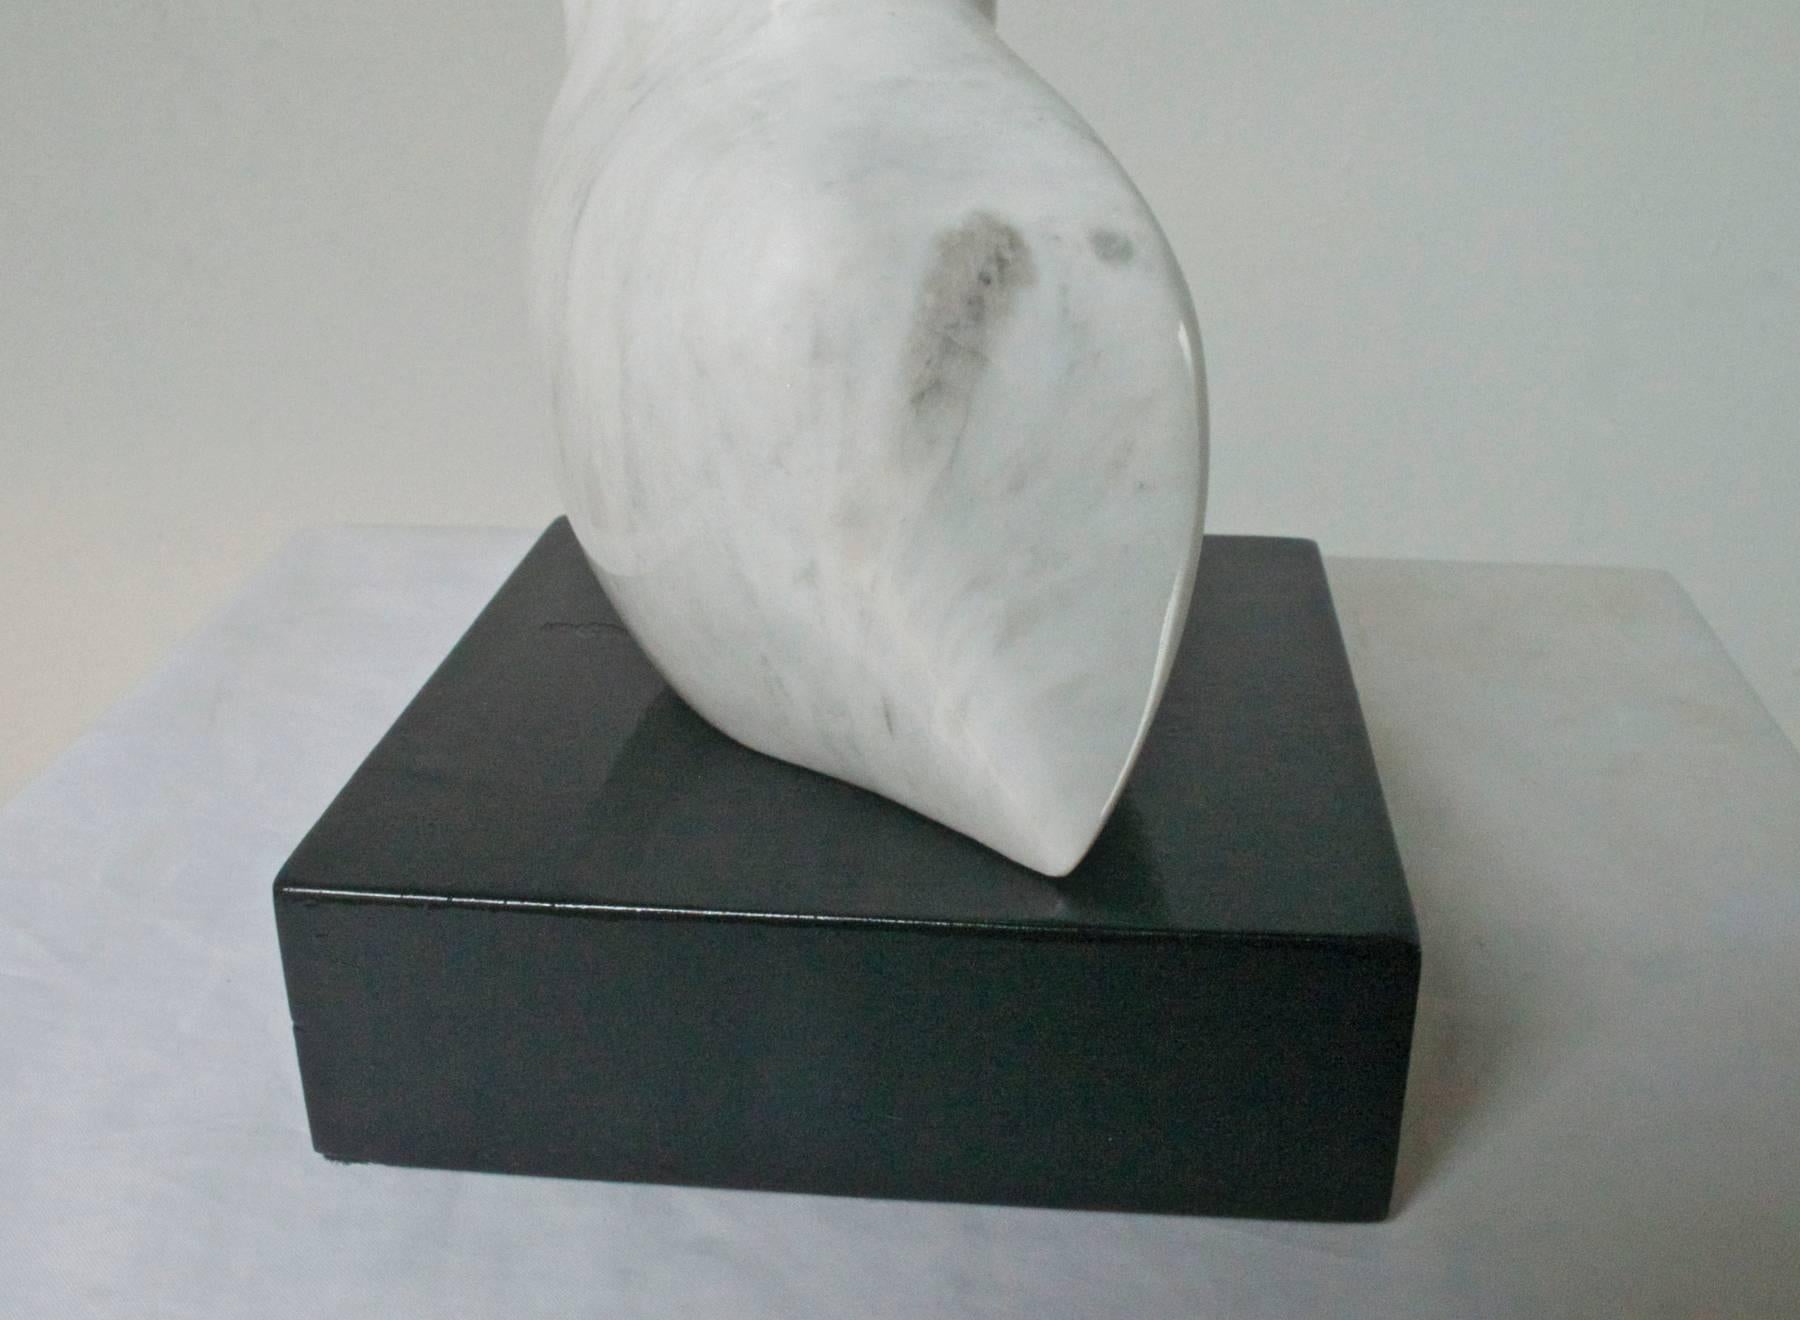 A simple abstract sculpture depicting a pelican. The monolithic piece of Carrara marble was hand chiseled and polished to a fairly shiny gloss. The piece has recently been perched atop the pictured black gallery riser.